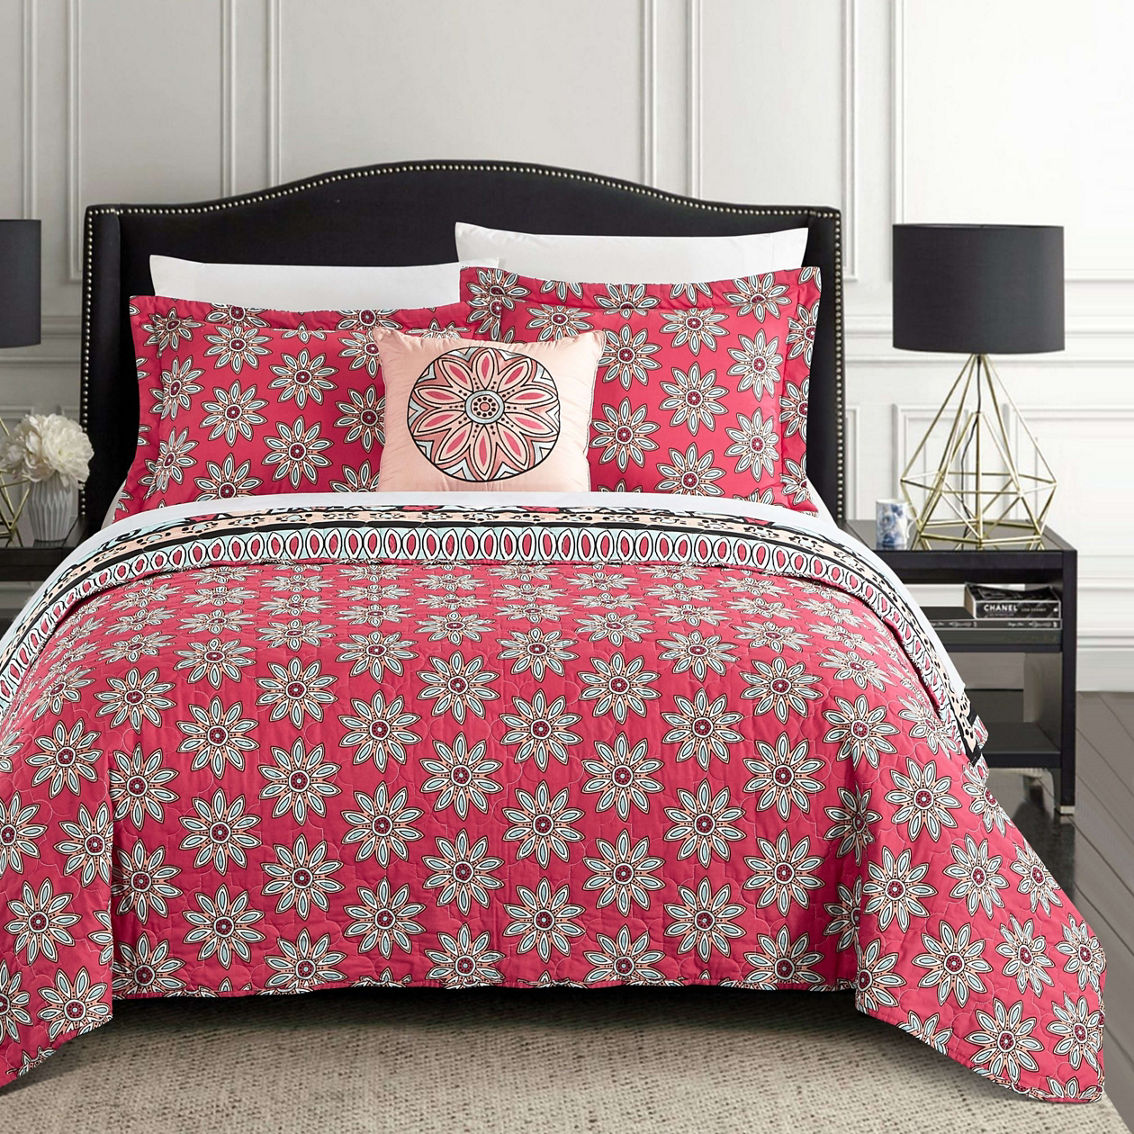 Chic Home Collin 4pc Quilt Set - Image 2 of 5